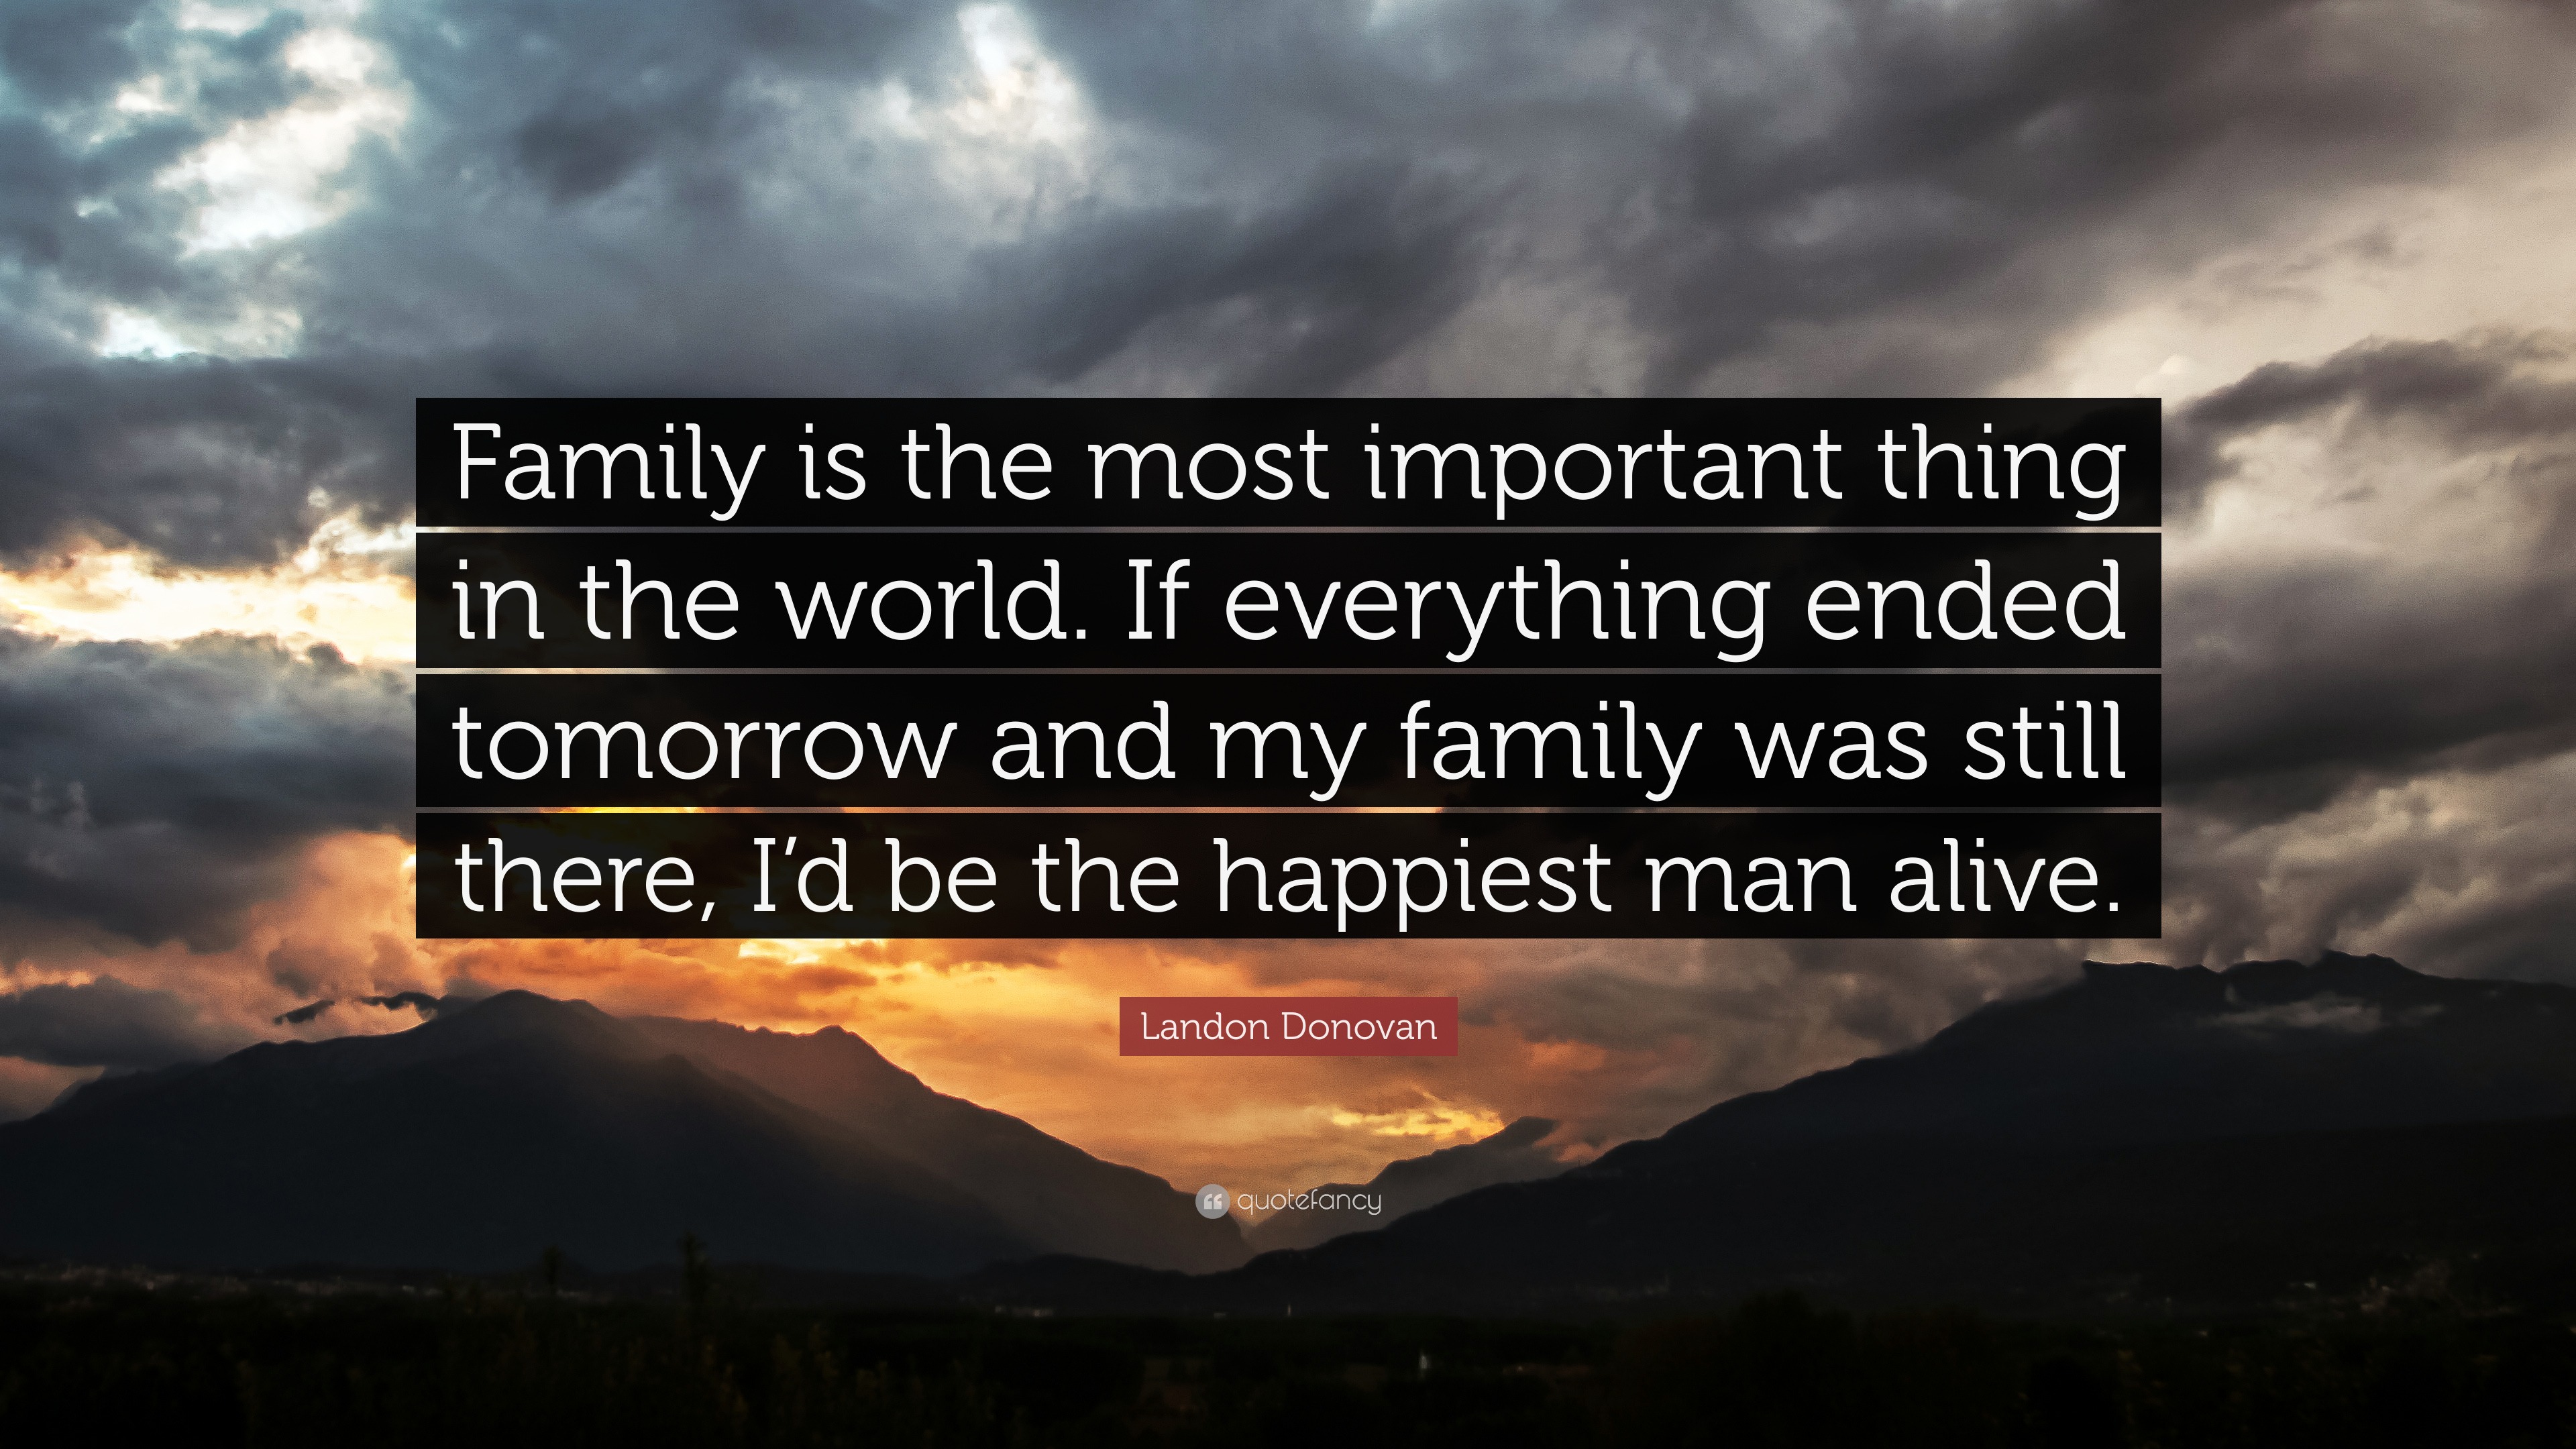 Landon Donovan Quote: “Family is the most important thing in the world ...